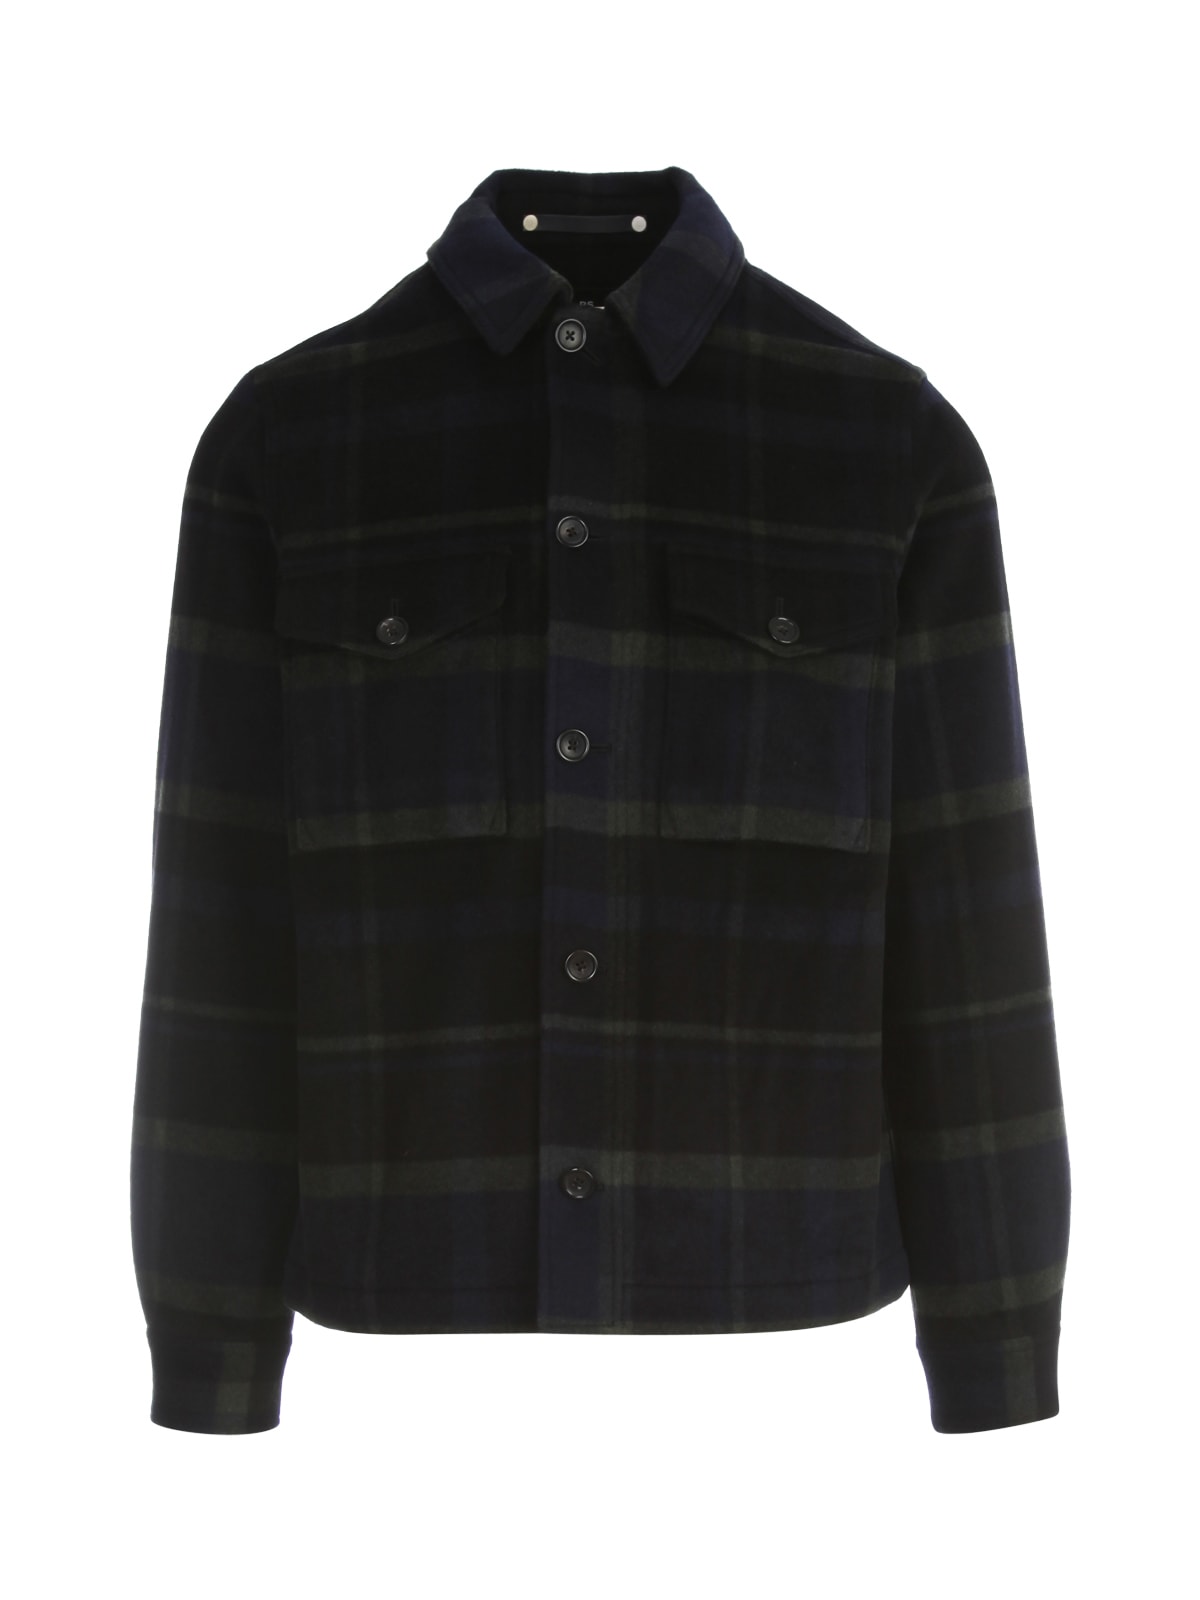 PS by Paul Smith Mens Militart Overshirt